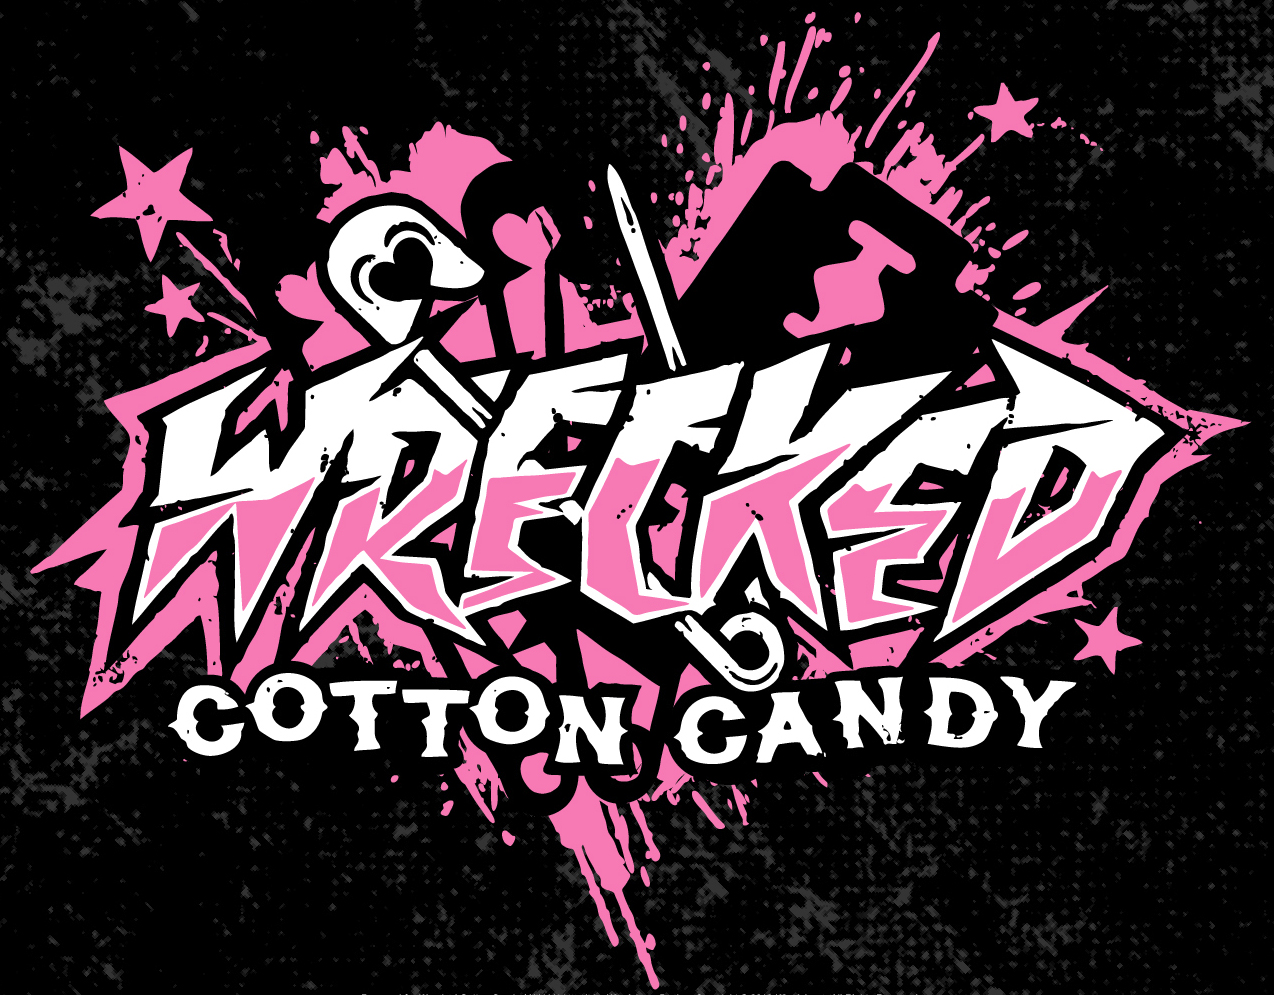 Wrecked Cotton Candy